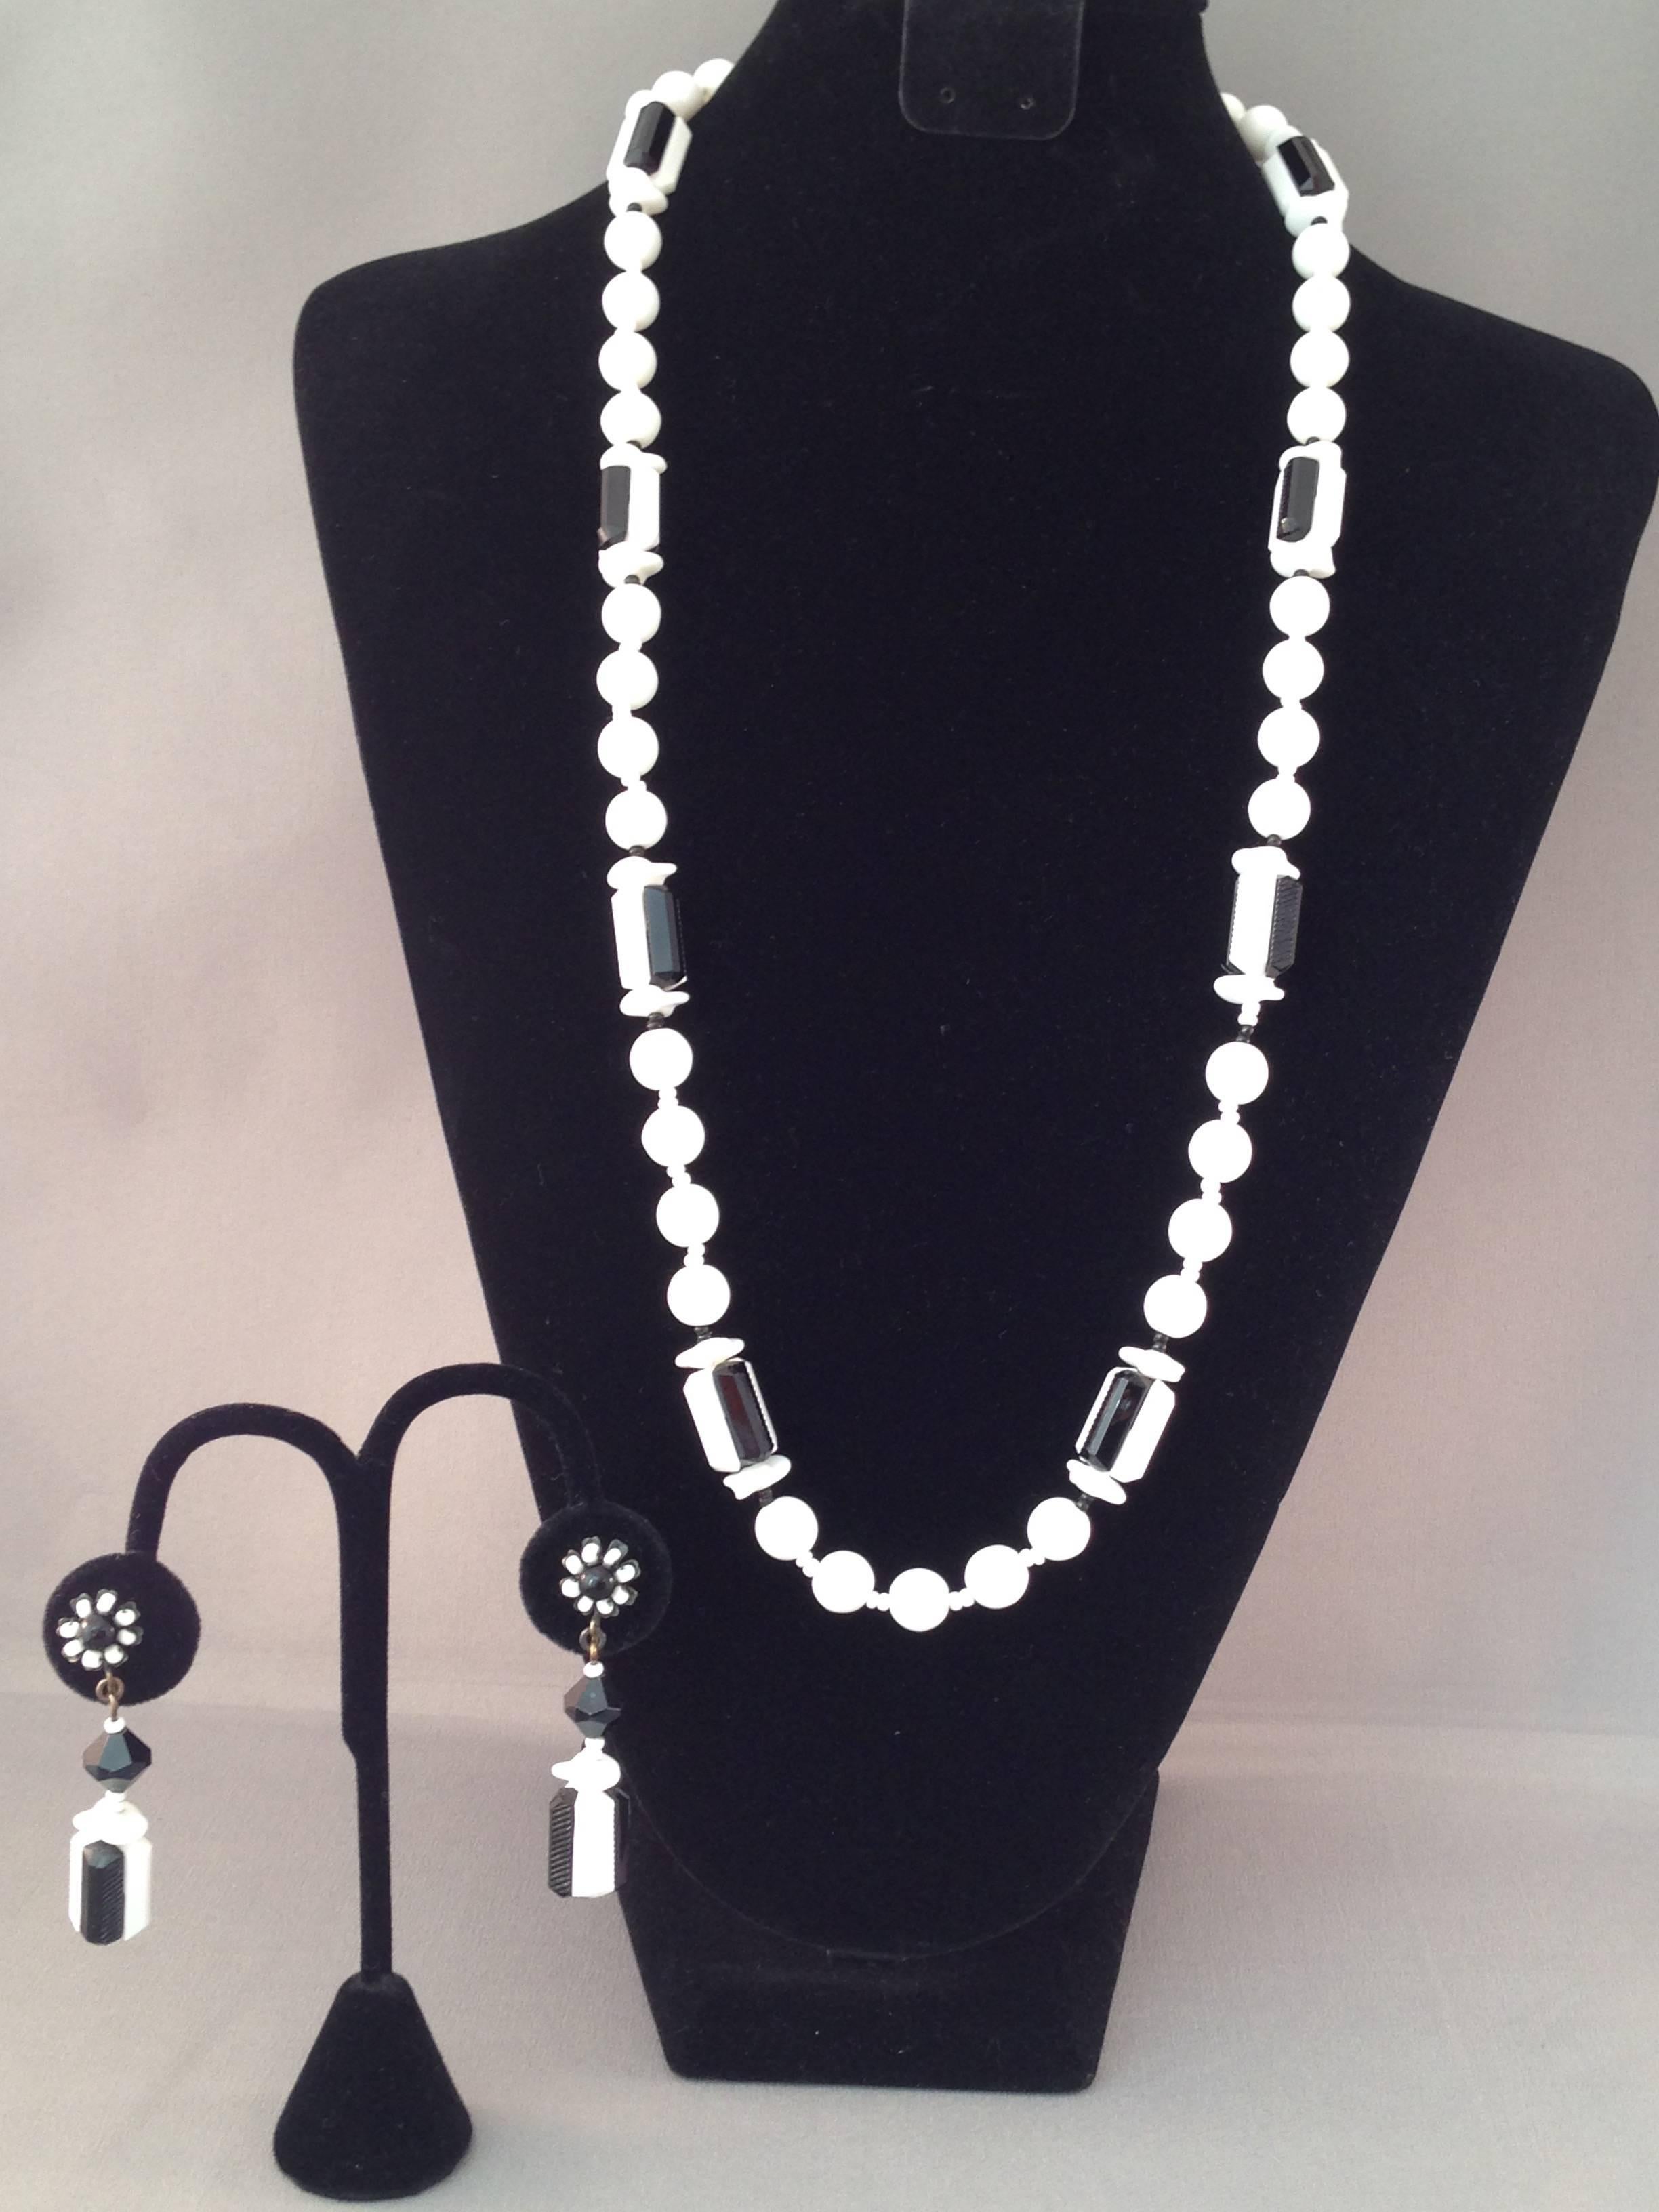 1960s Miriam Haskell black and white glass bead necklace and earring set. The necklace is 29" long and is marked "Miriam Haskell" on the back of the clasp. The clip-on earrings measure 2 1/4" long and are marked "Miriam